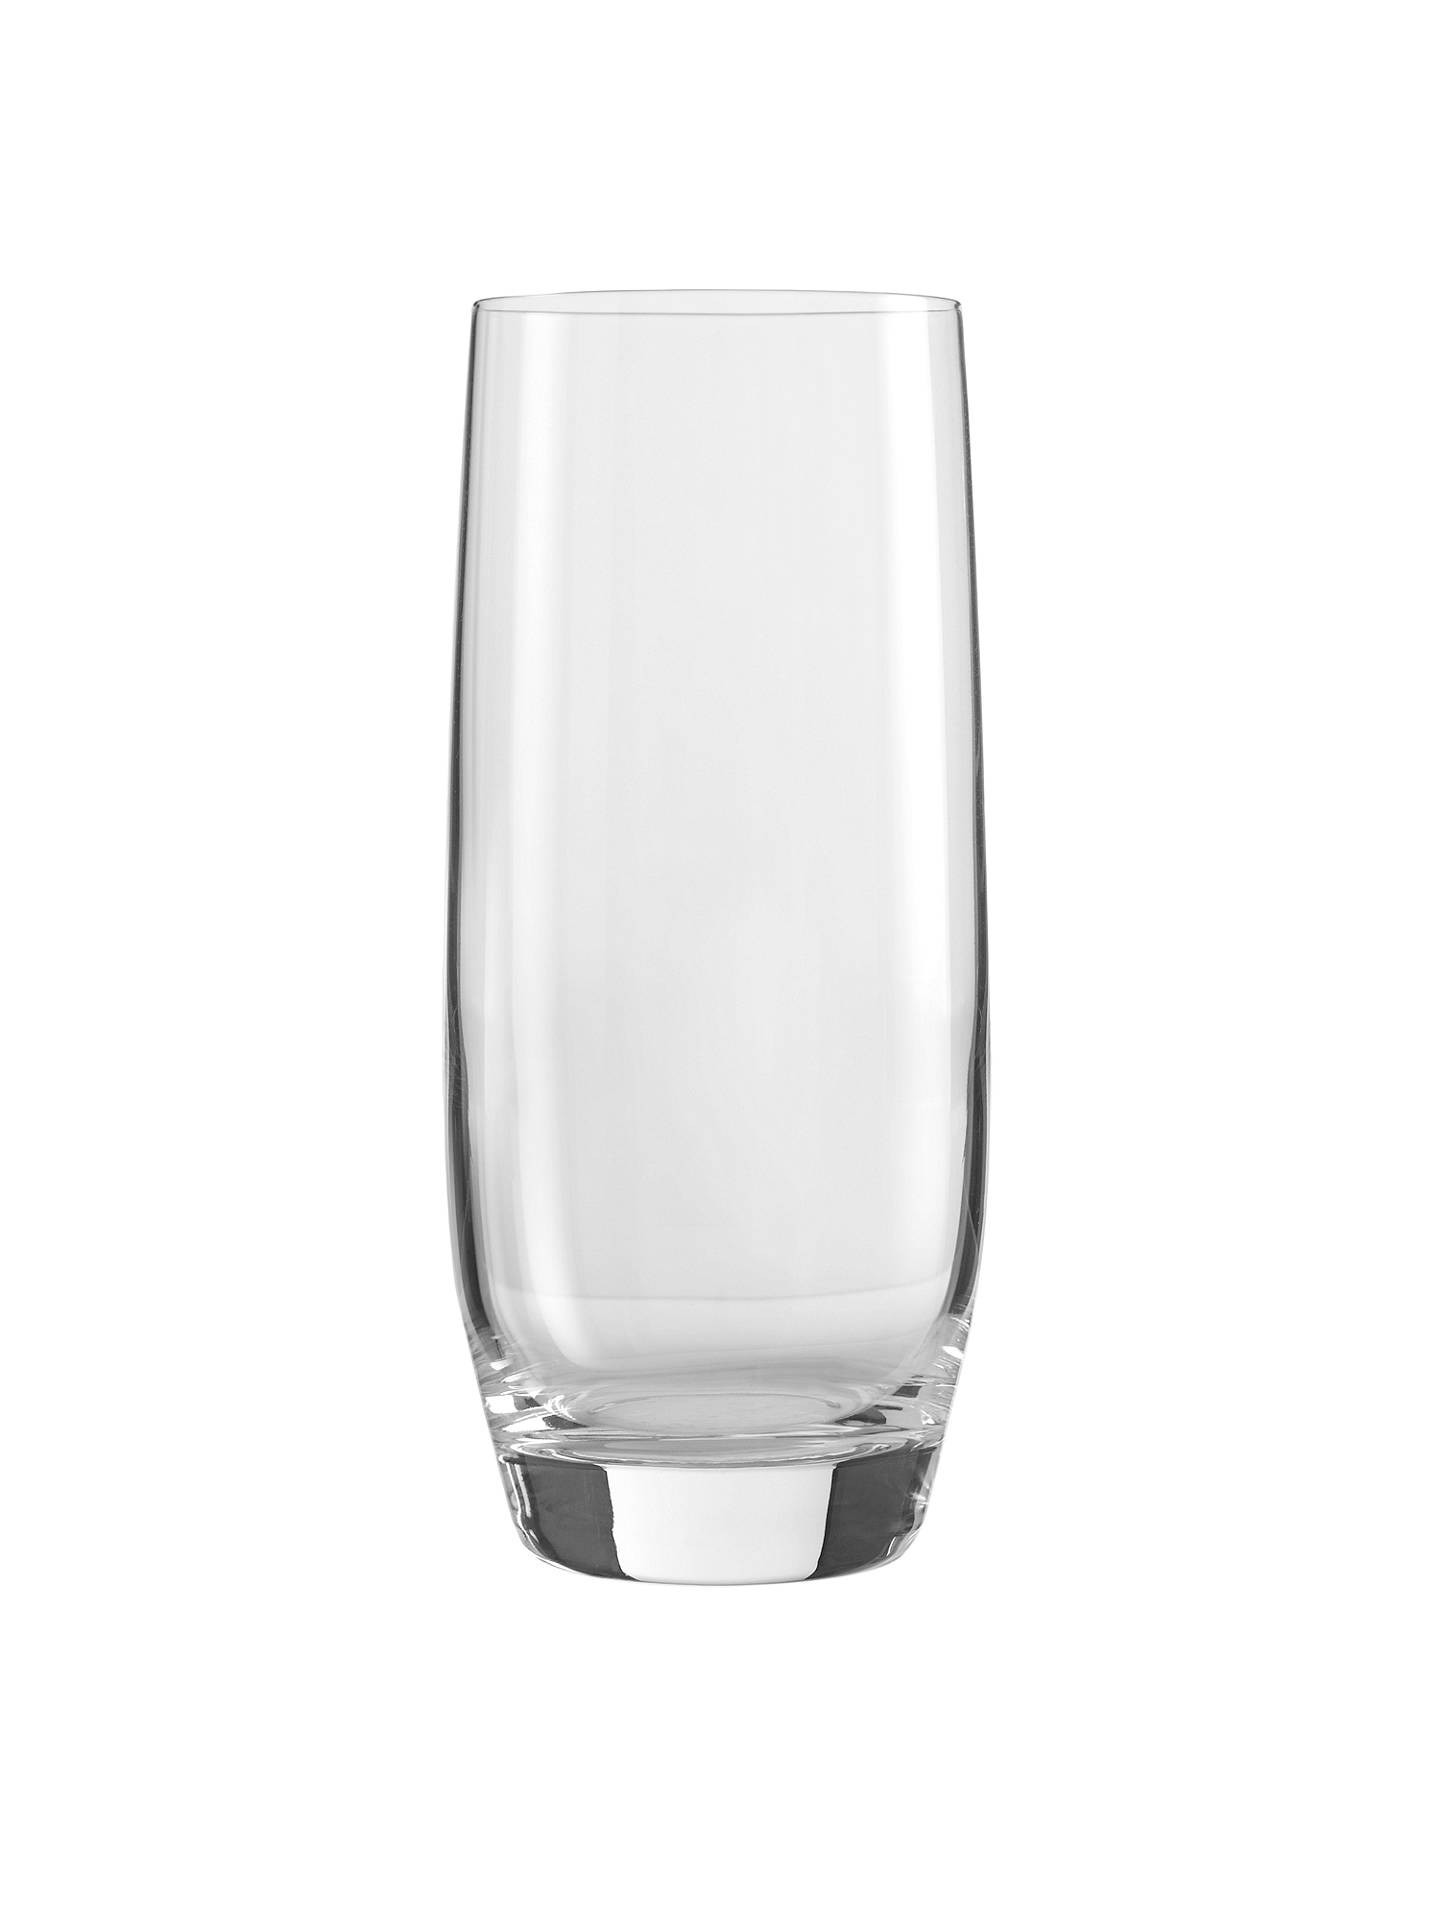 16 Fashionable Clear Glass Globe Vase 2024 free download clear glass globe vase of john lewis partners connoisseur highballs set of 4 clear 450ml throughout buyjohn lewis partners connoisseur highballs set of 4 clear 450ml online at